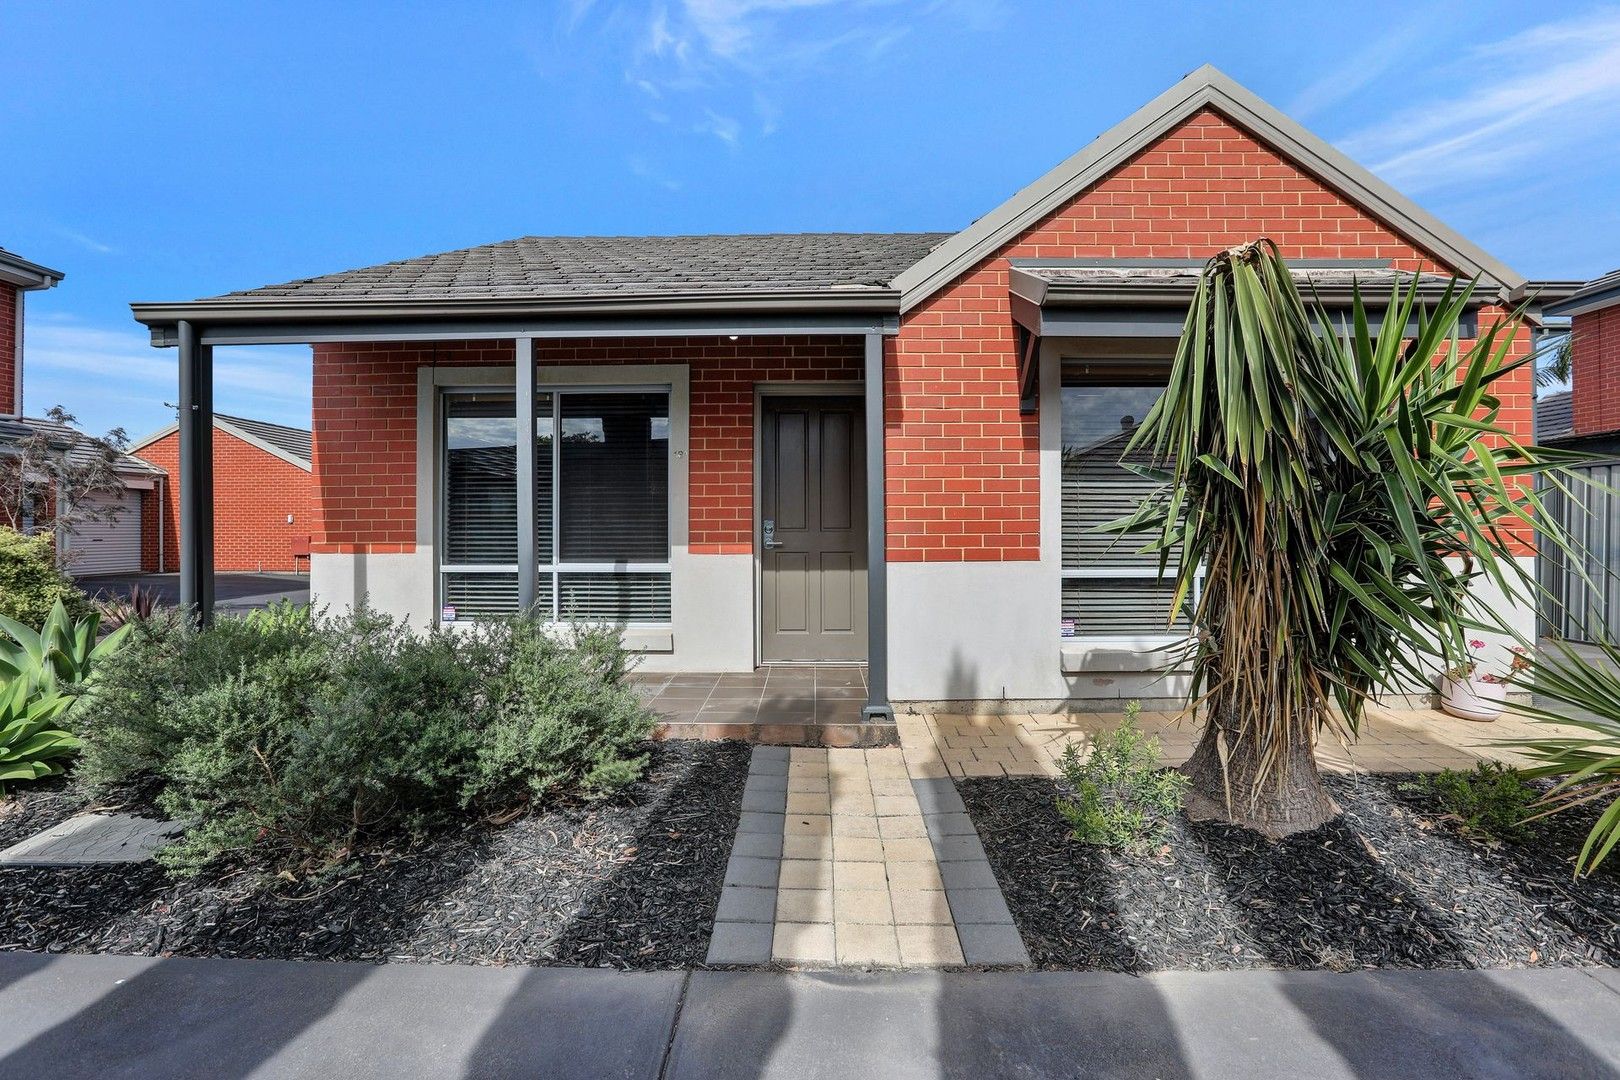 2 bedrooms House in 18A WATERMAN TERRACE MITCHELL PARK SA, 5043